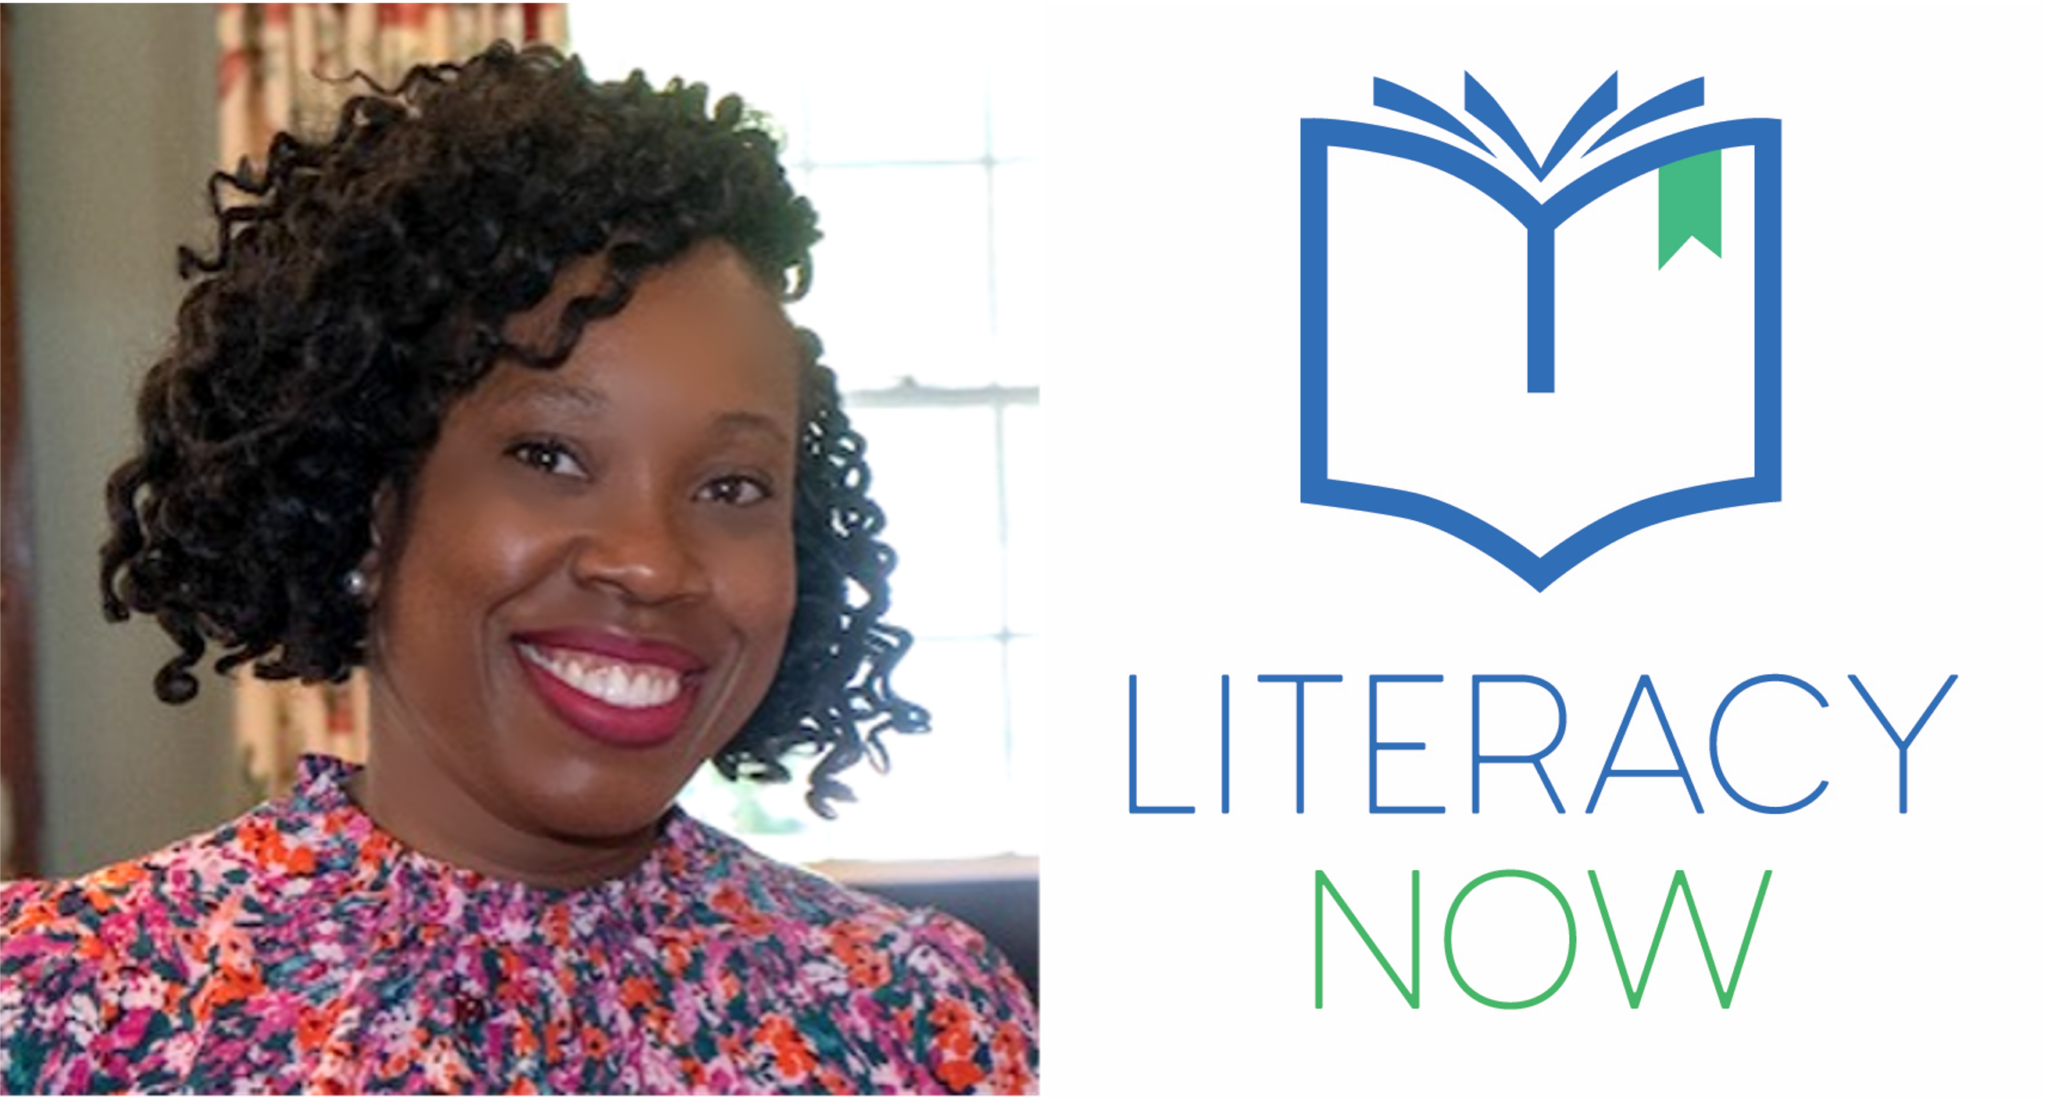 SIPPS READING INTERVENTION SUCCESS IN TEXAS: AN INTERVIEW WITH LITERACY NOW